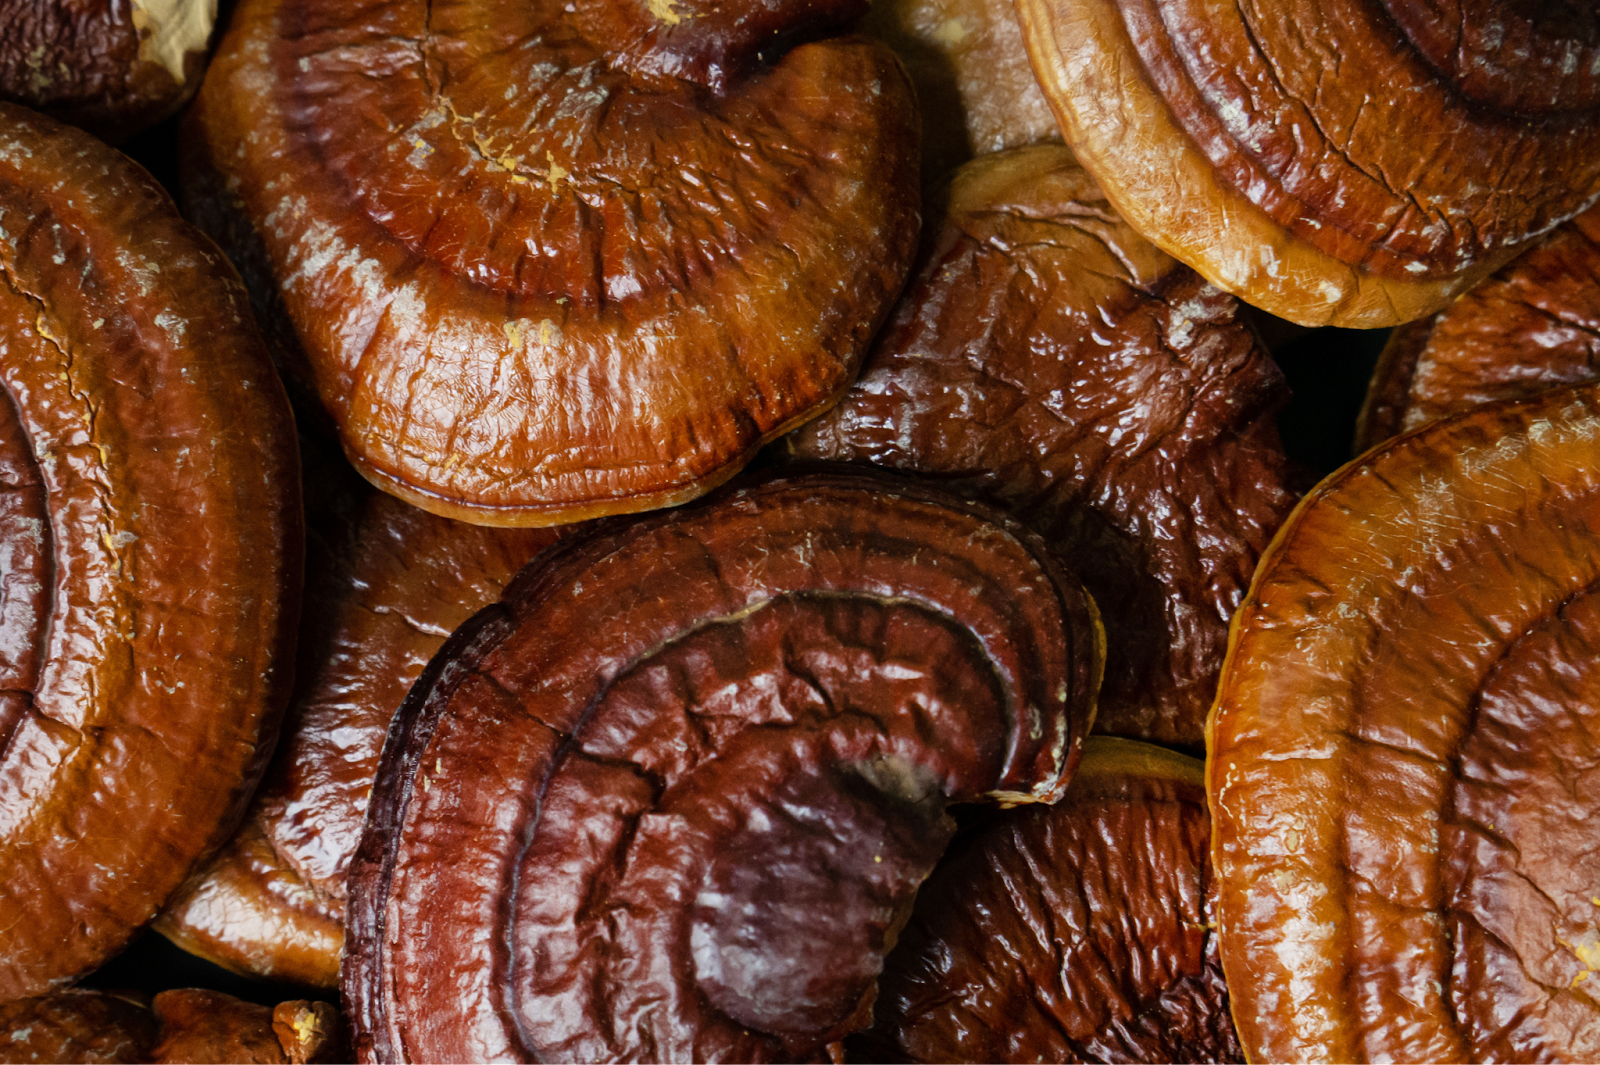 Benefits, uses, and history of reishi mushrooms